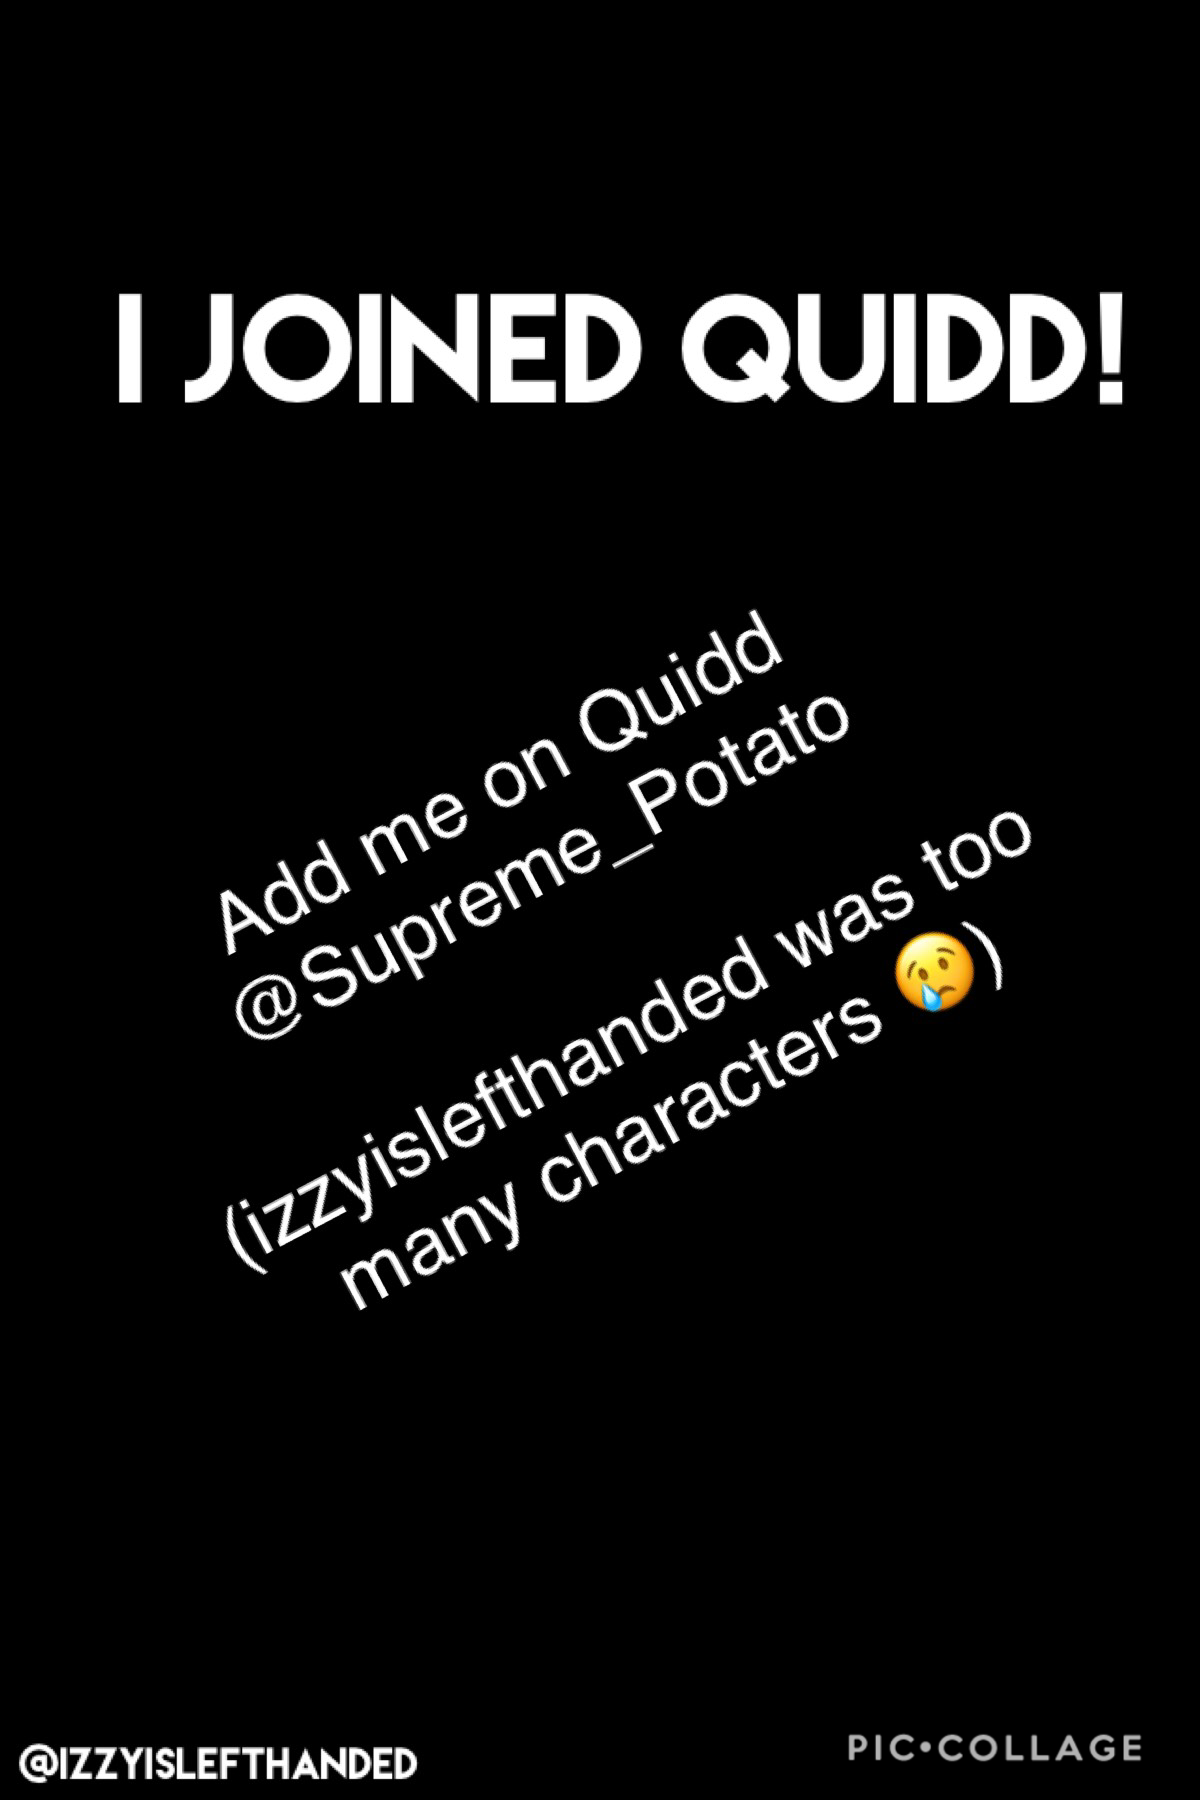 🧐wonders what happens if you tap??🤔

YOU GET A GOLD STAR ⭐️ 

sesame yeet

The maximum characters for a username on Quidd is  15, and izzyislefthanded is 16. 🙄